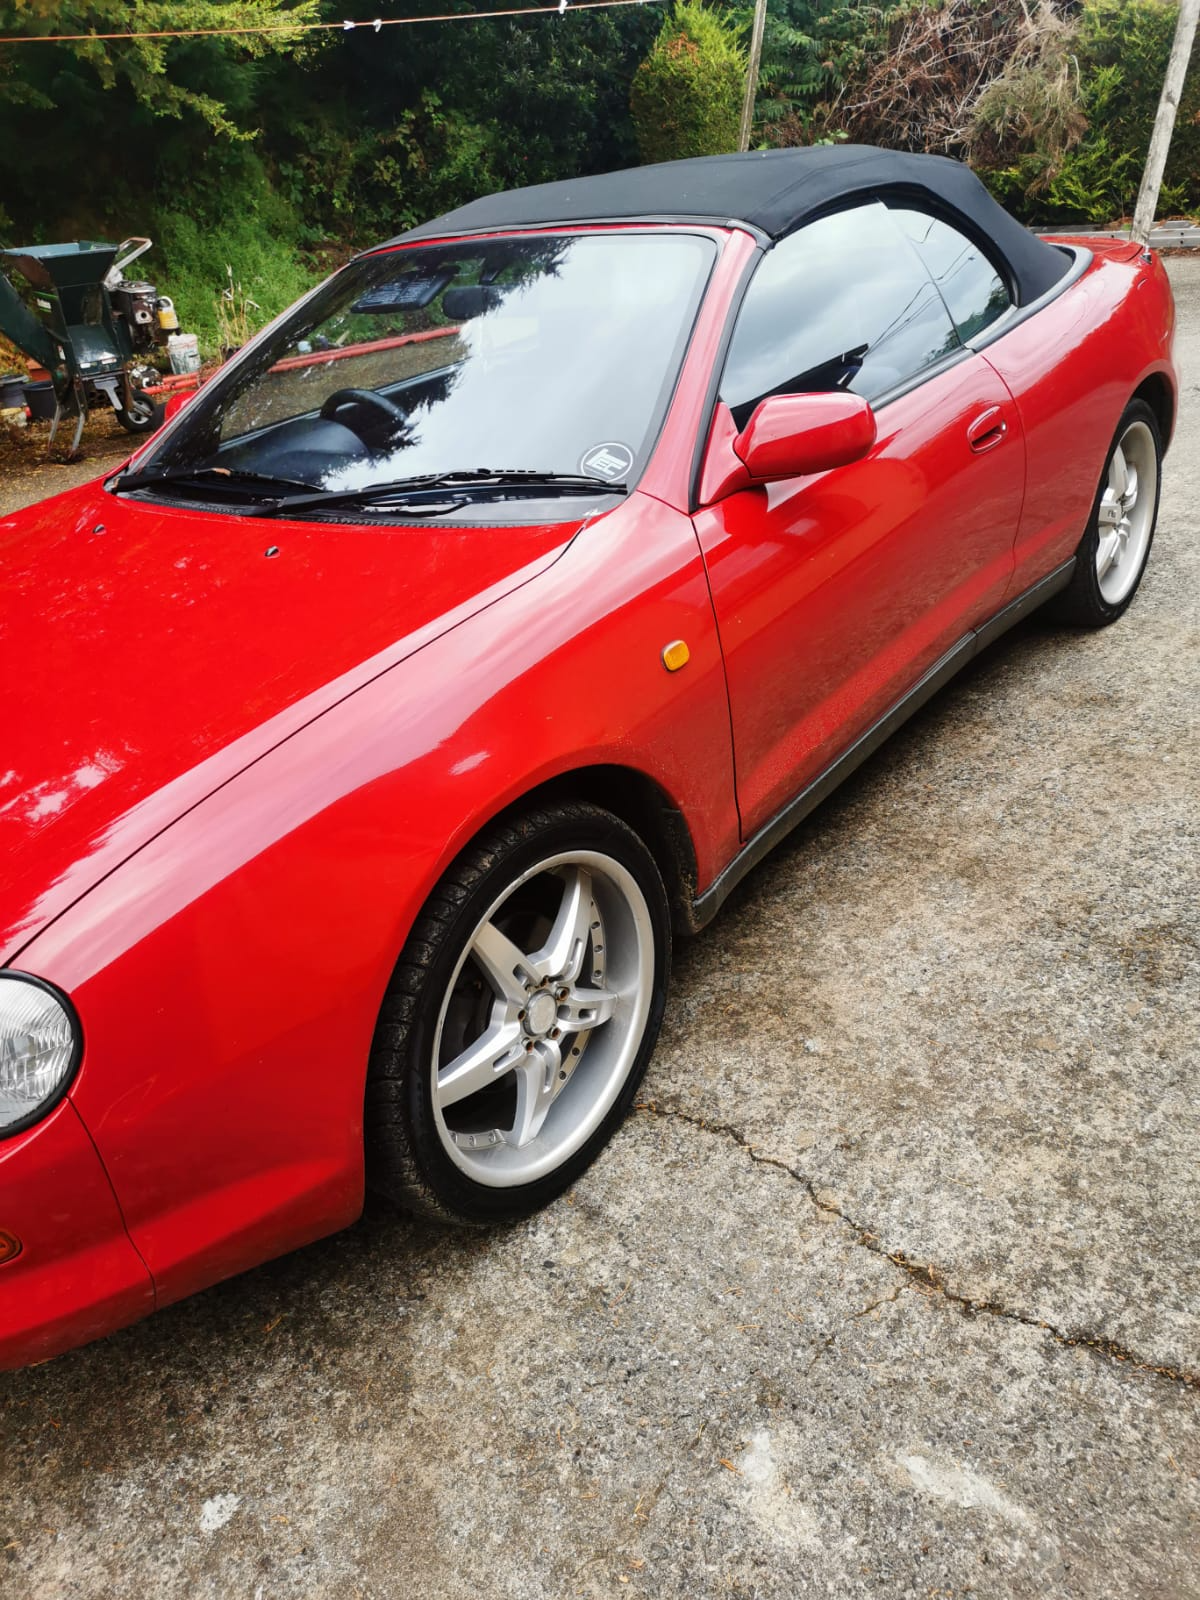 Used Toyota Celica 1995 in Wexford